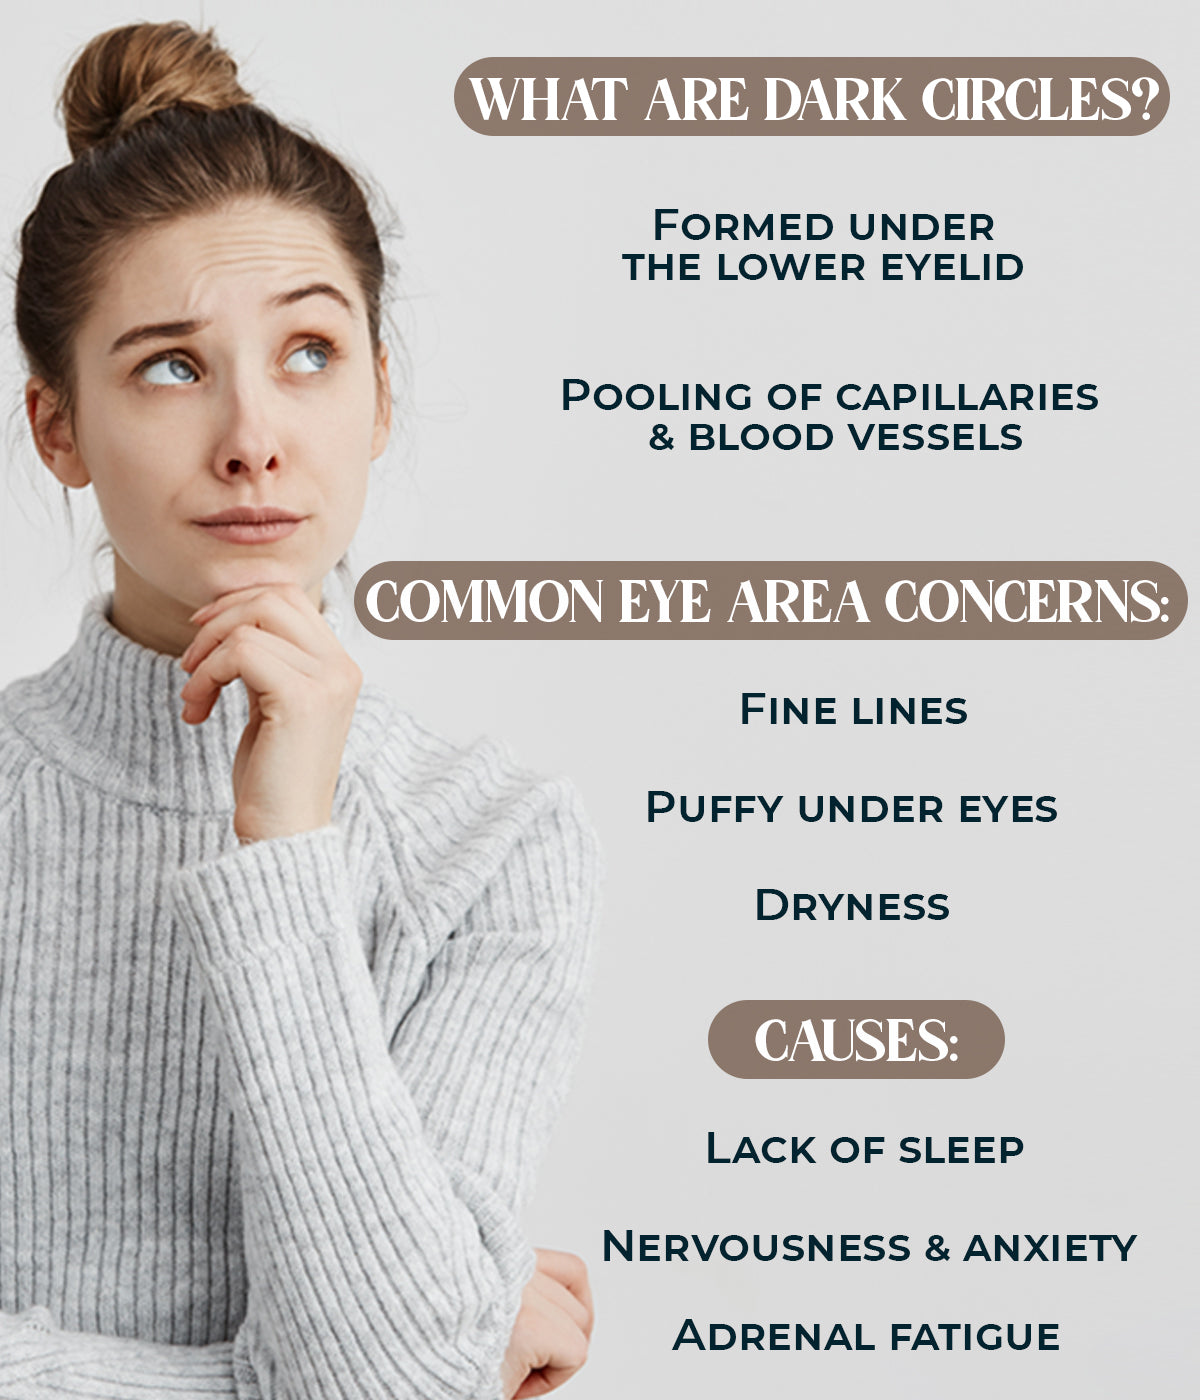 This is an image of what are dark circles and other common eye area concerns